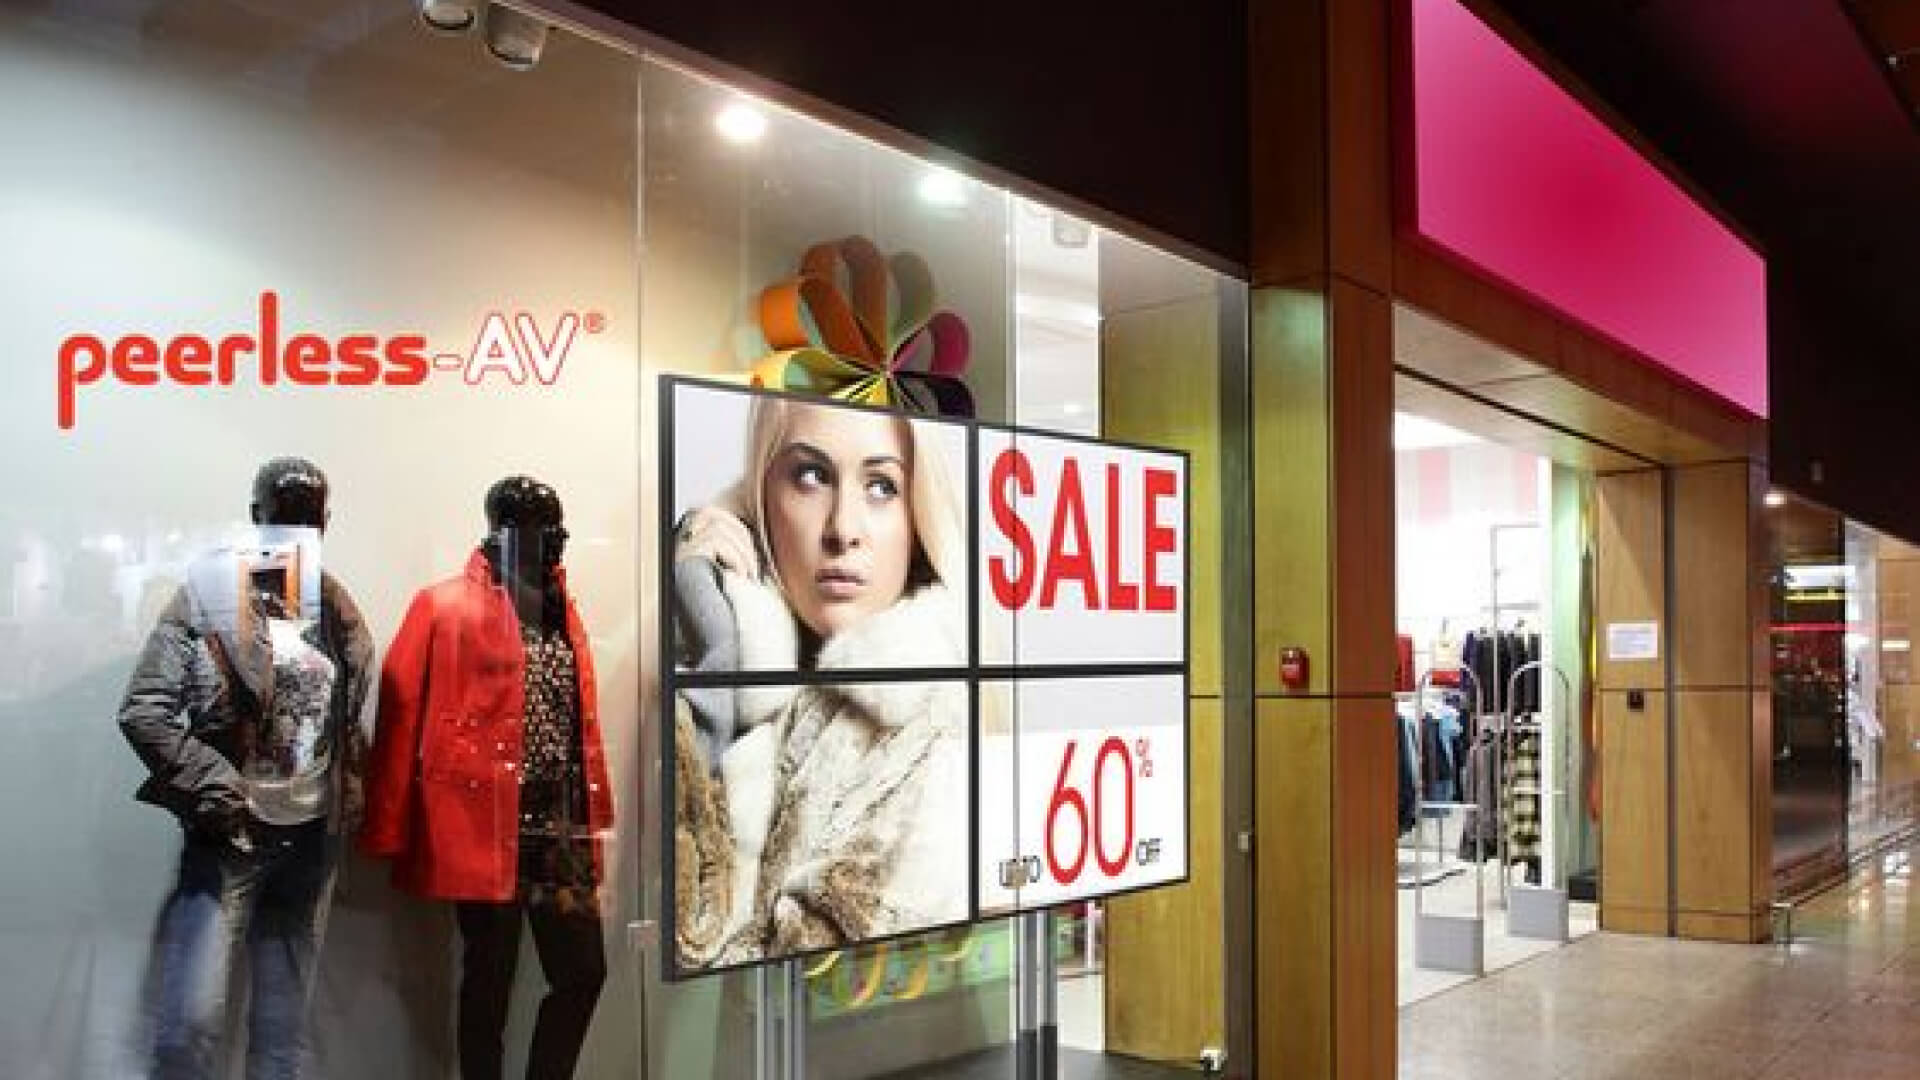  Sales & promotions are displayed in store front signage.